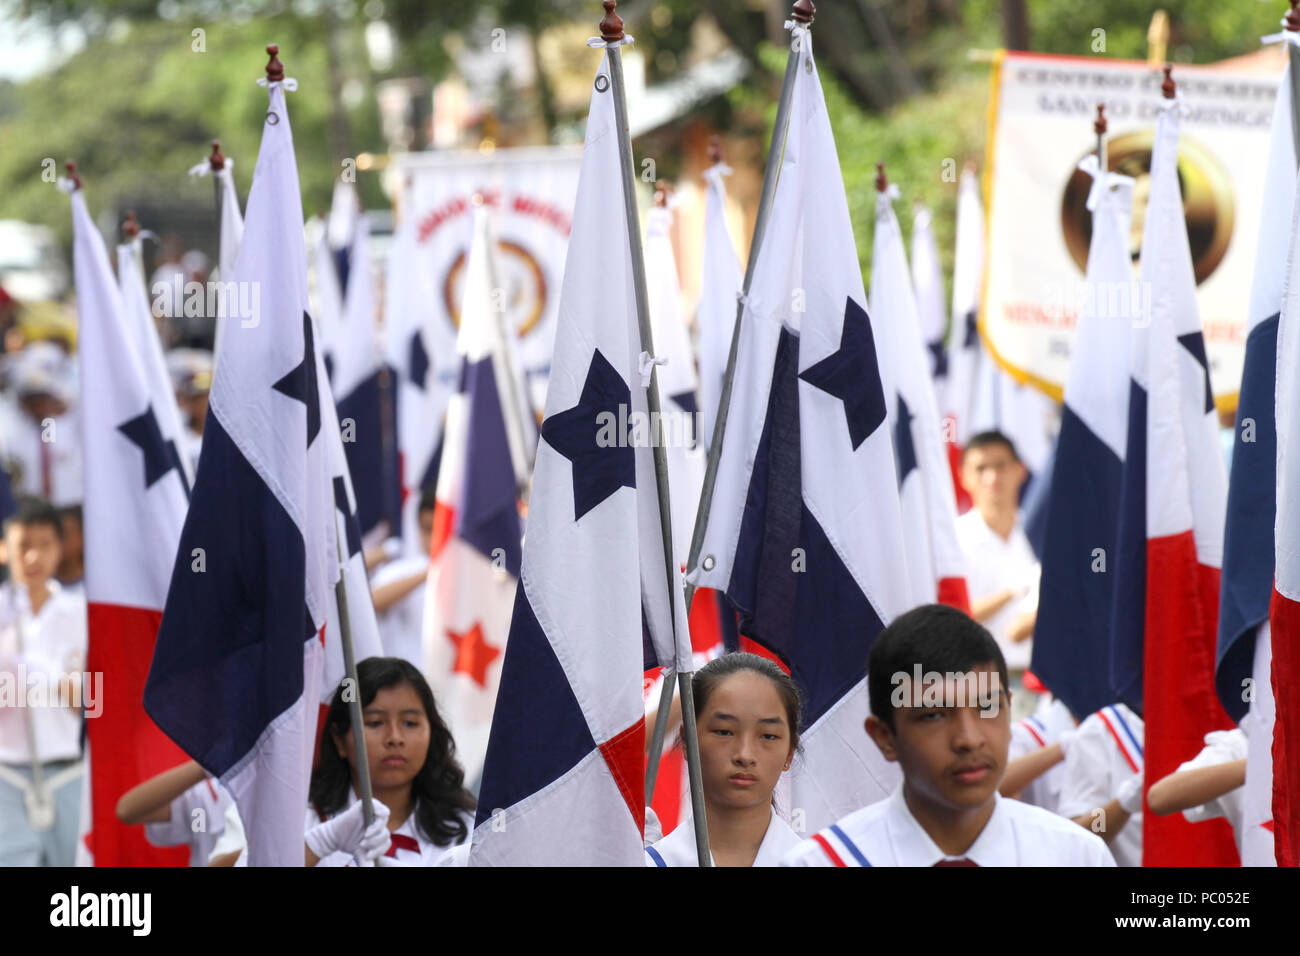 PENONOME, PANAMA, NOV 4th 2016:  School kids carrying the Panamanian flag  during the celebration of separation from Colombia Parade. Stock Photo